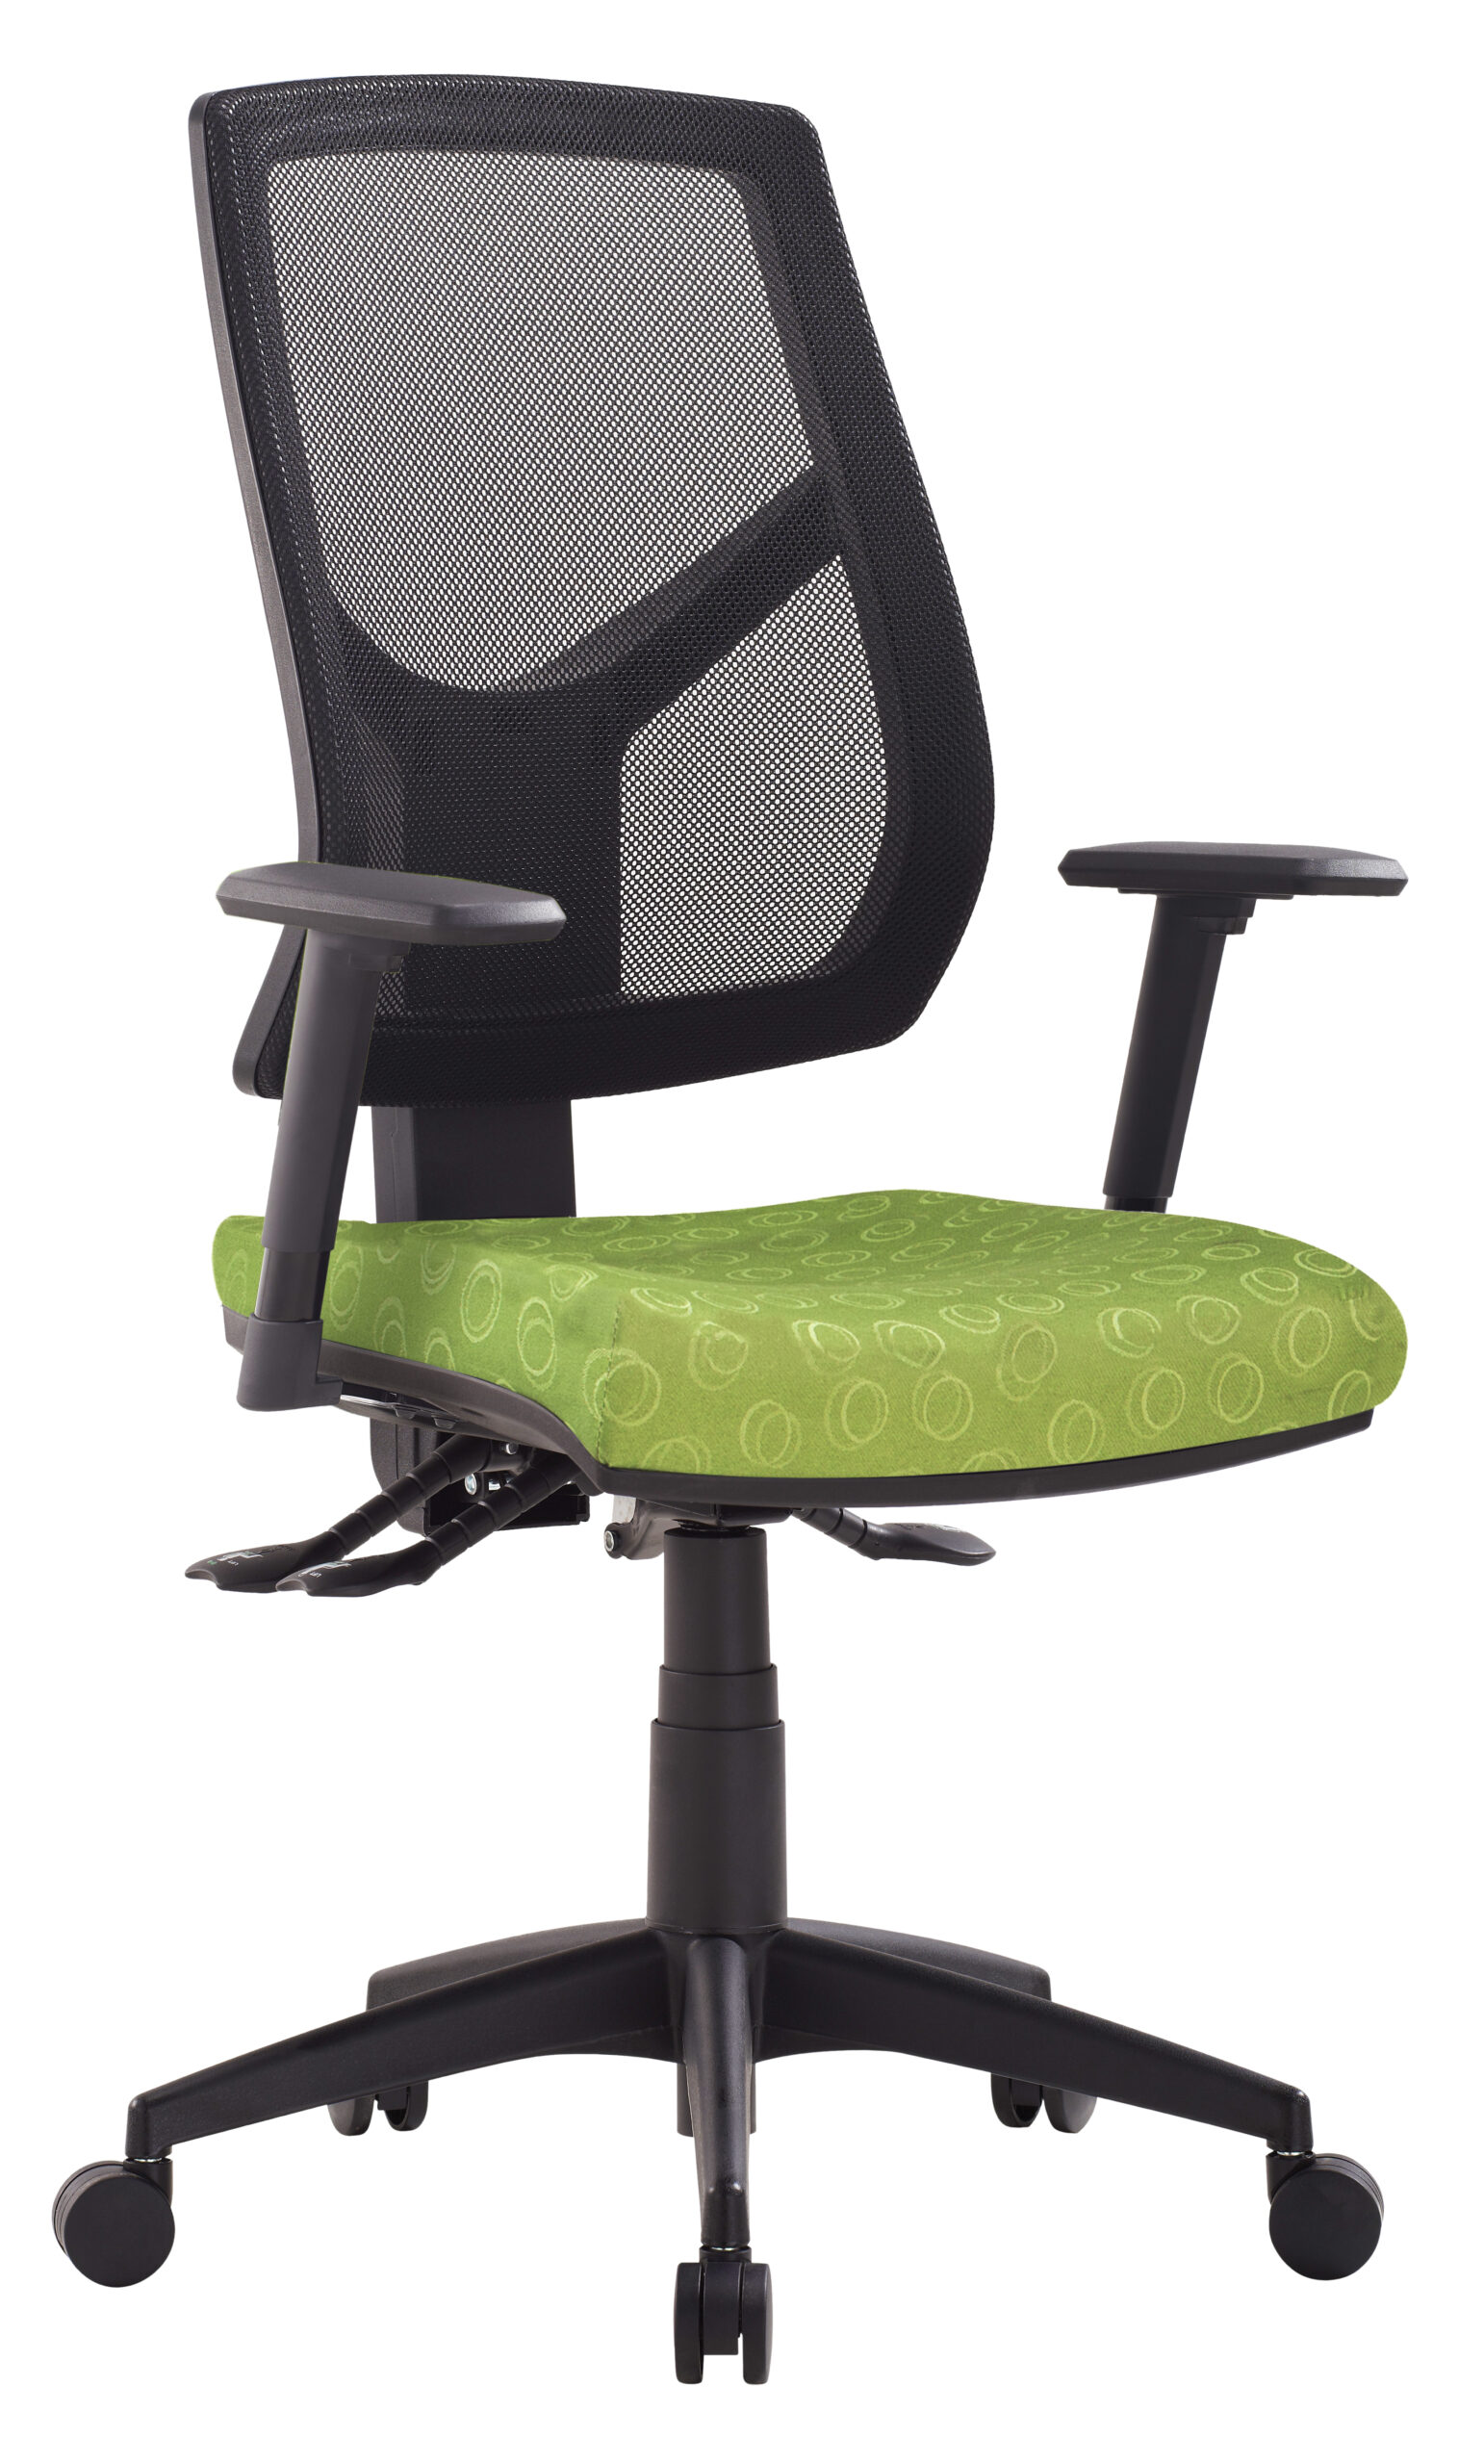 Vesta 3 Lever High Mesh Back Square Seat Task Chair With Arms